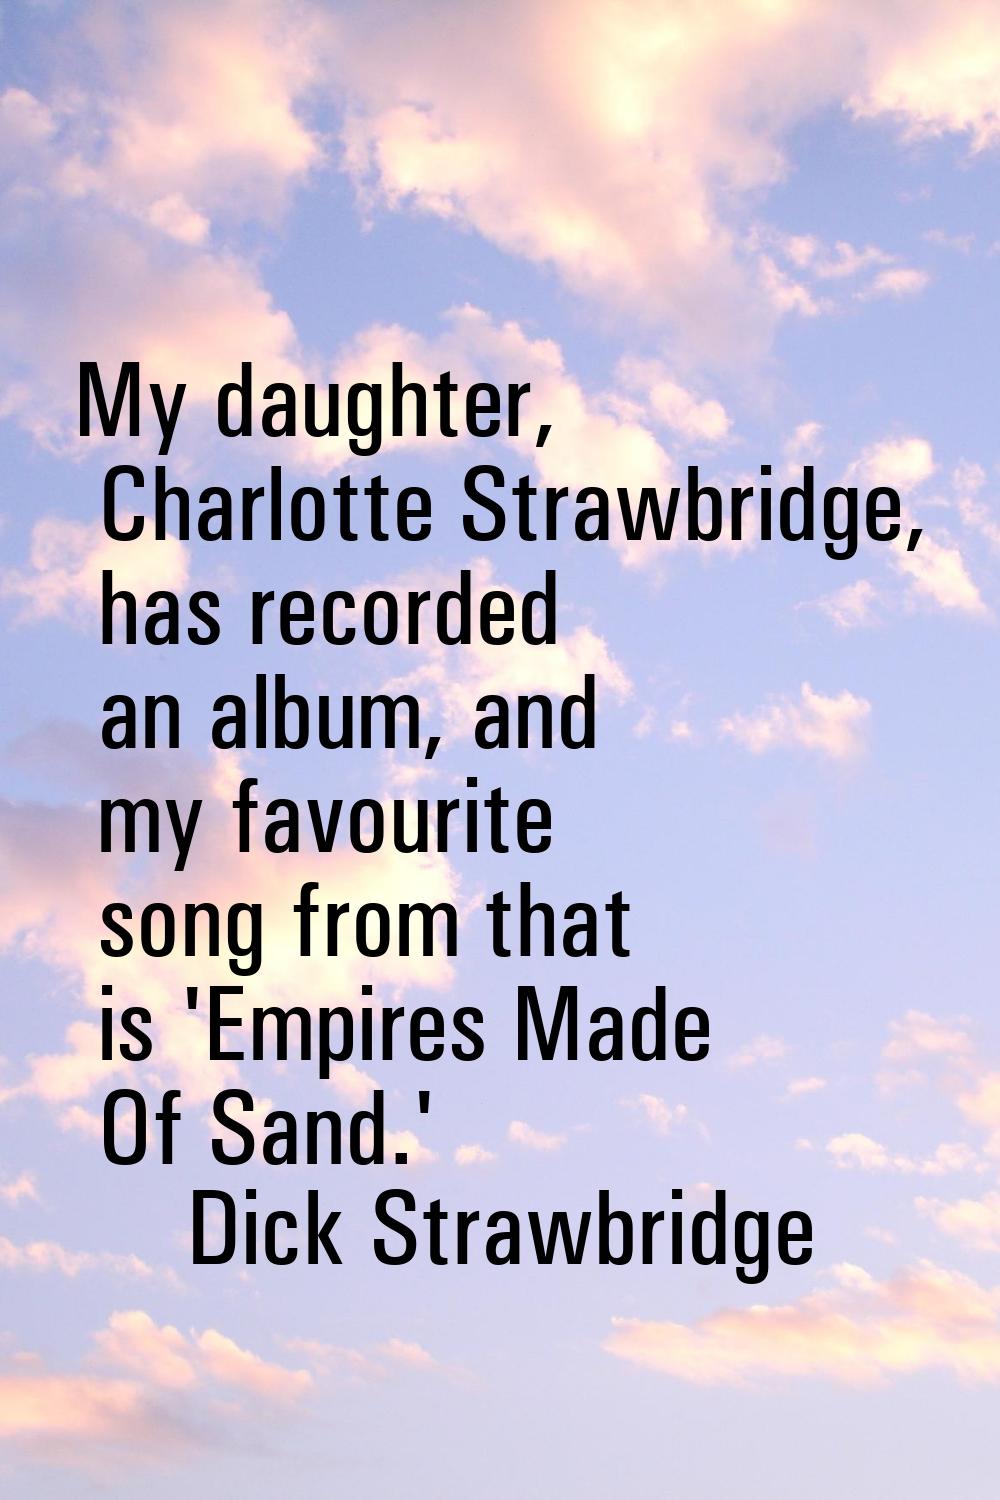 My daughter, Charlotte Strawbridge, has recorded an album, and my favourite song from that is 'Empi